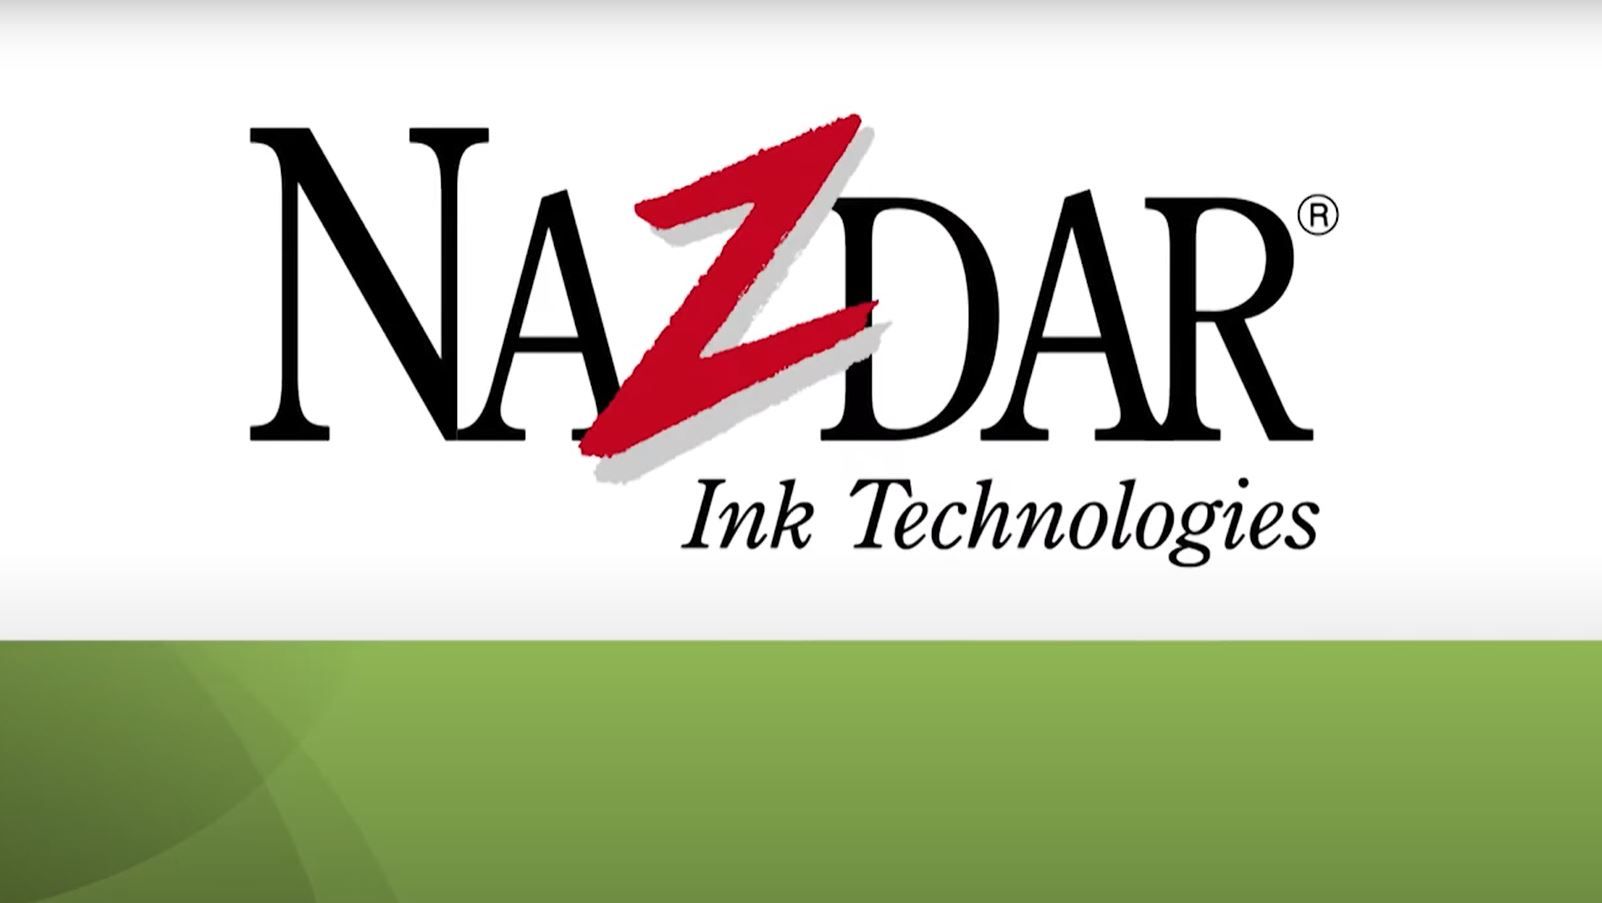 Nazdar Ink Technologies - Company Overview